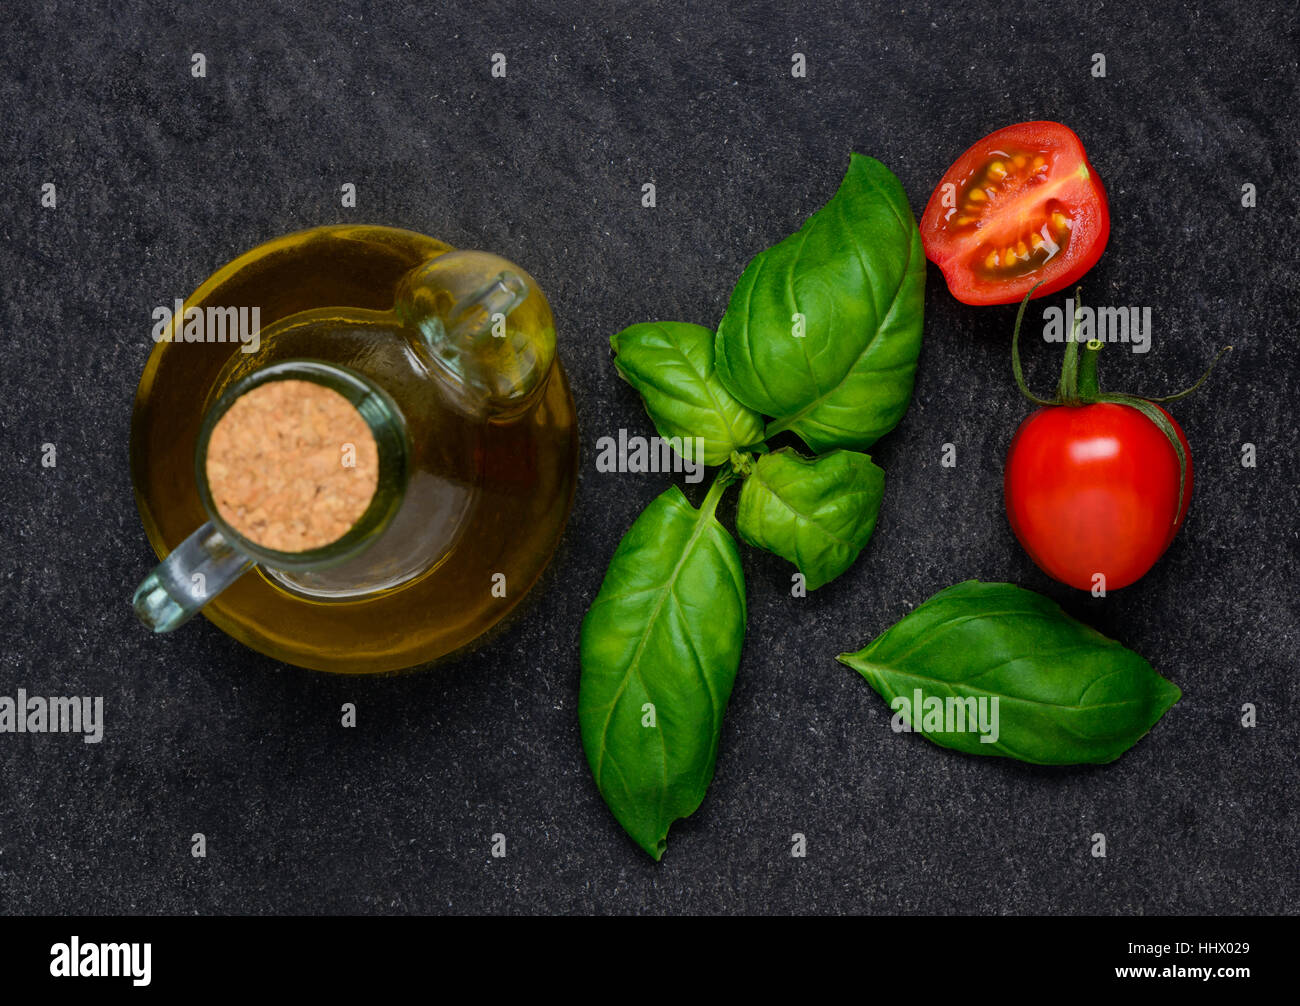 Bottle of olive oil and Fresh green basil leaves with red tomato Stock Photo